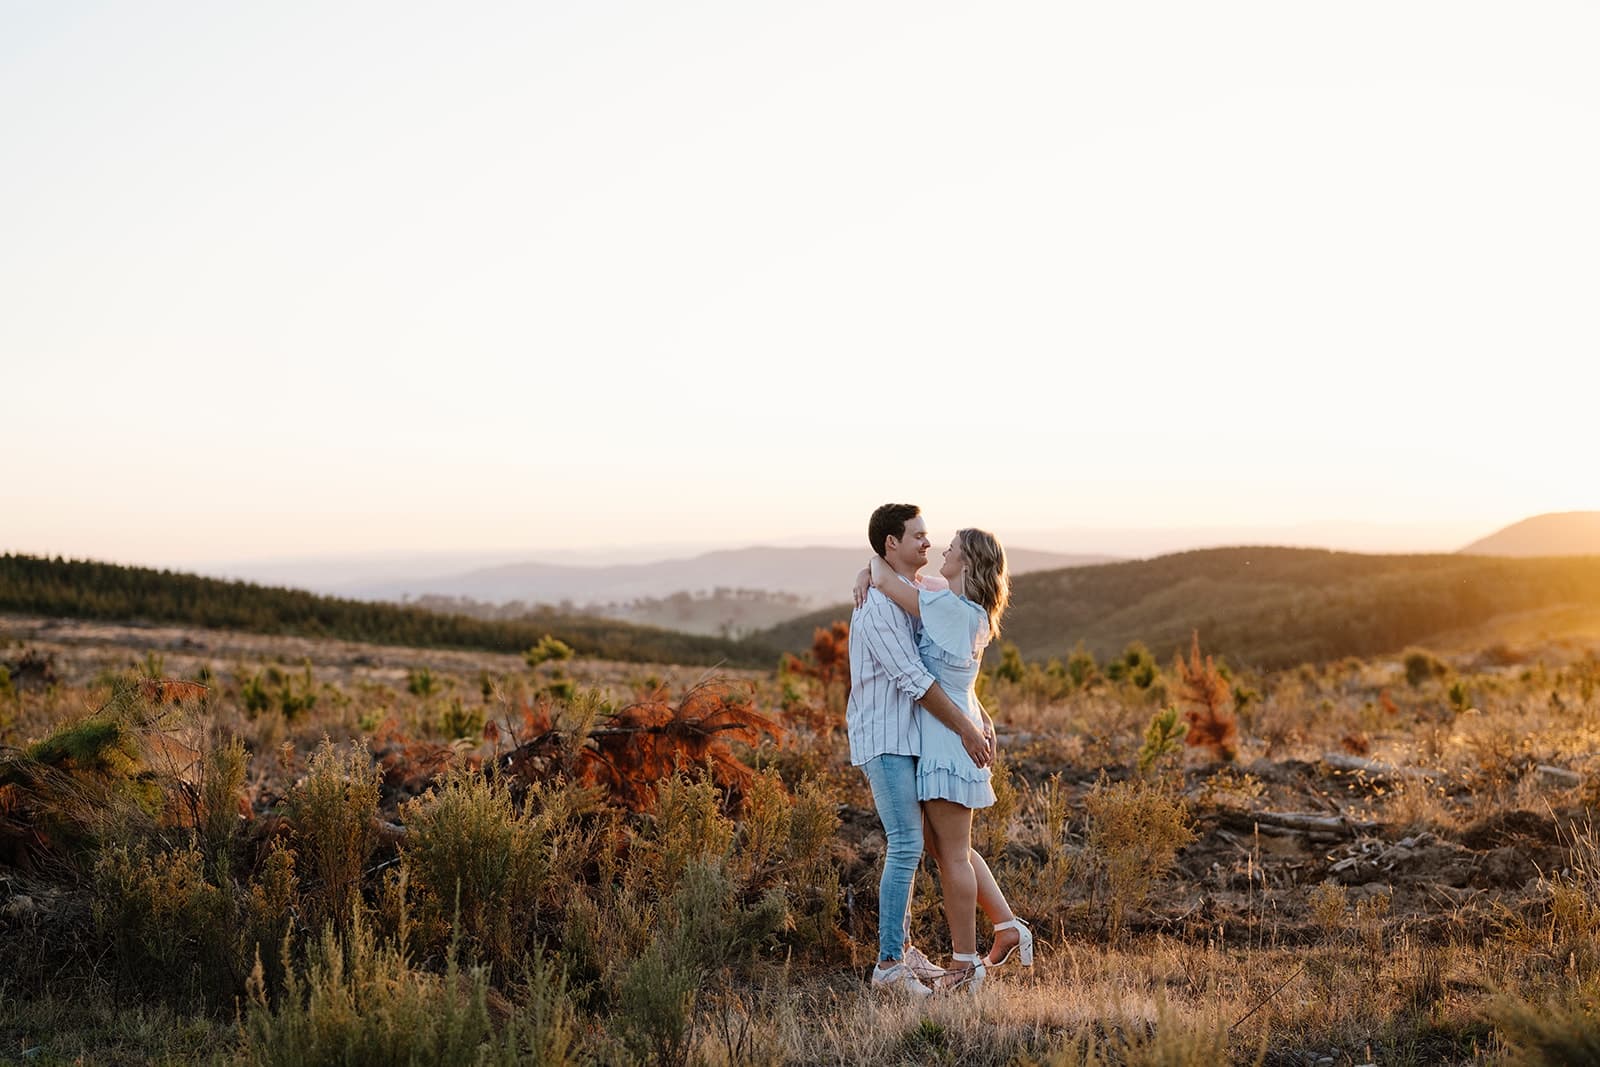 A Magical Engagement Shoot: Recounting Dimity & Bryson's Love Story in Orange, NSW